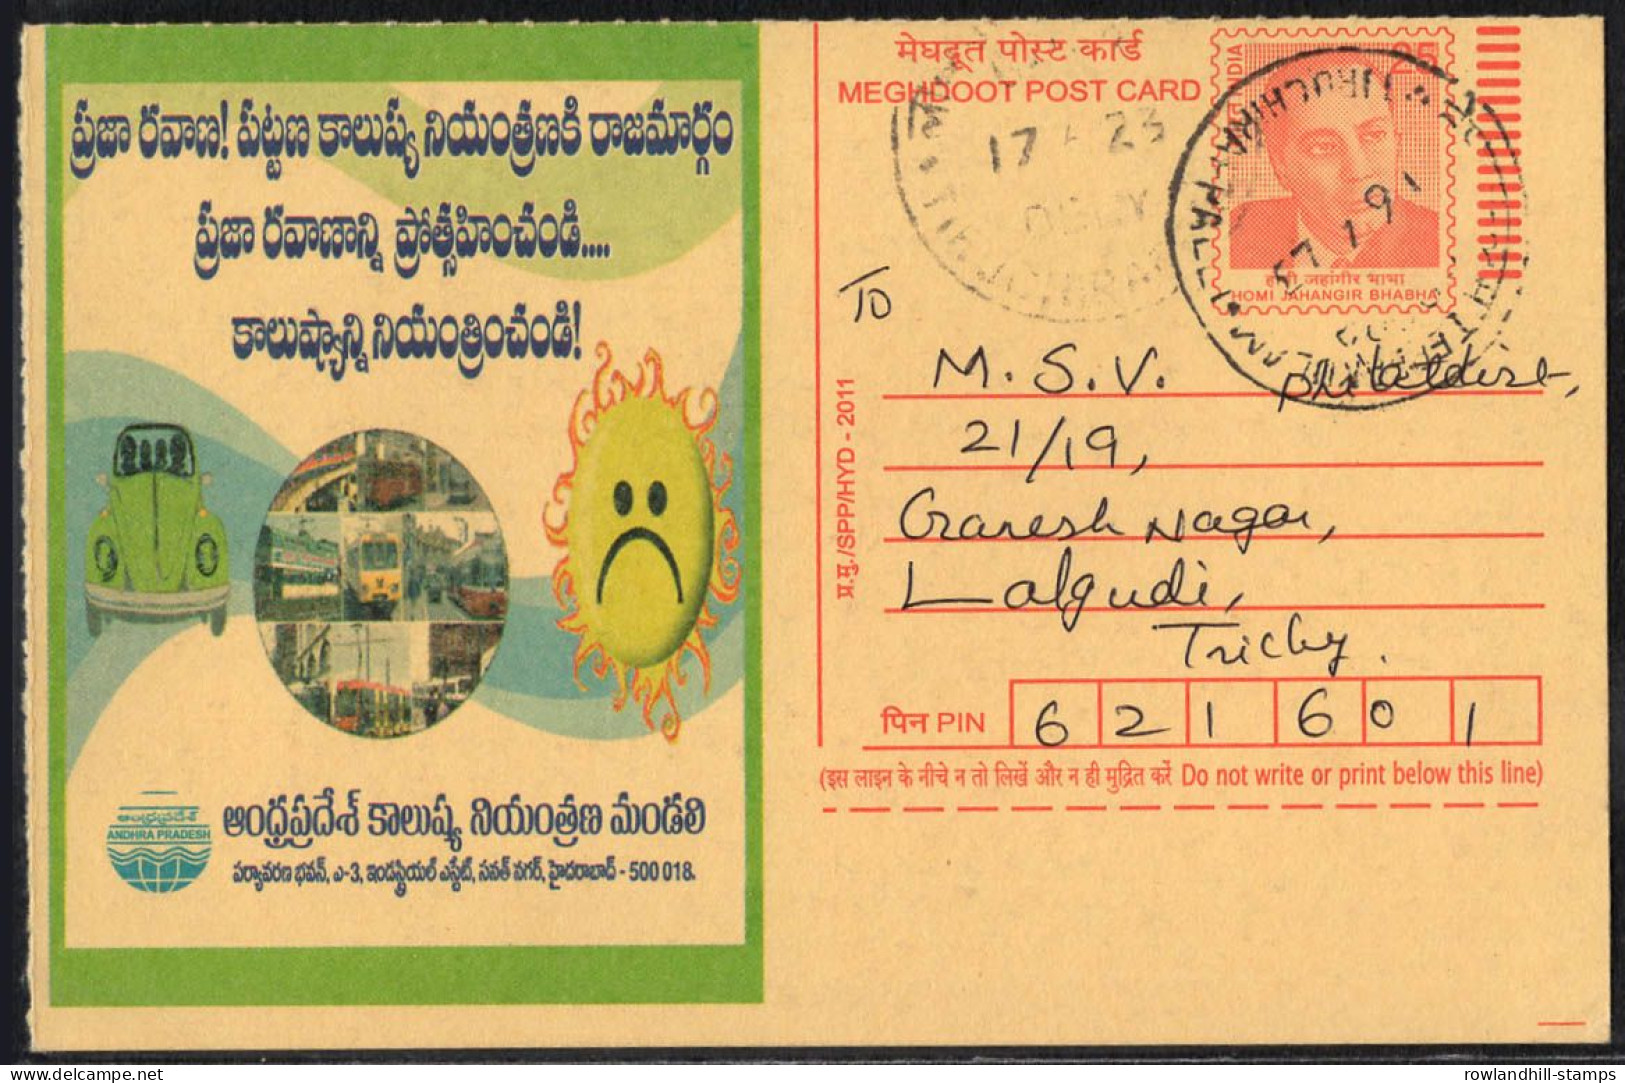 India, 2011, SAVE WATER, WATER CONSERVATION, Meghdoot Post Card, Used, Environment, Postcard, Energy, Sun, Andhra, B23 - Agua